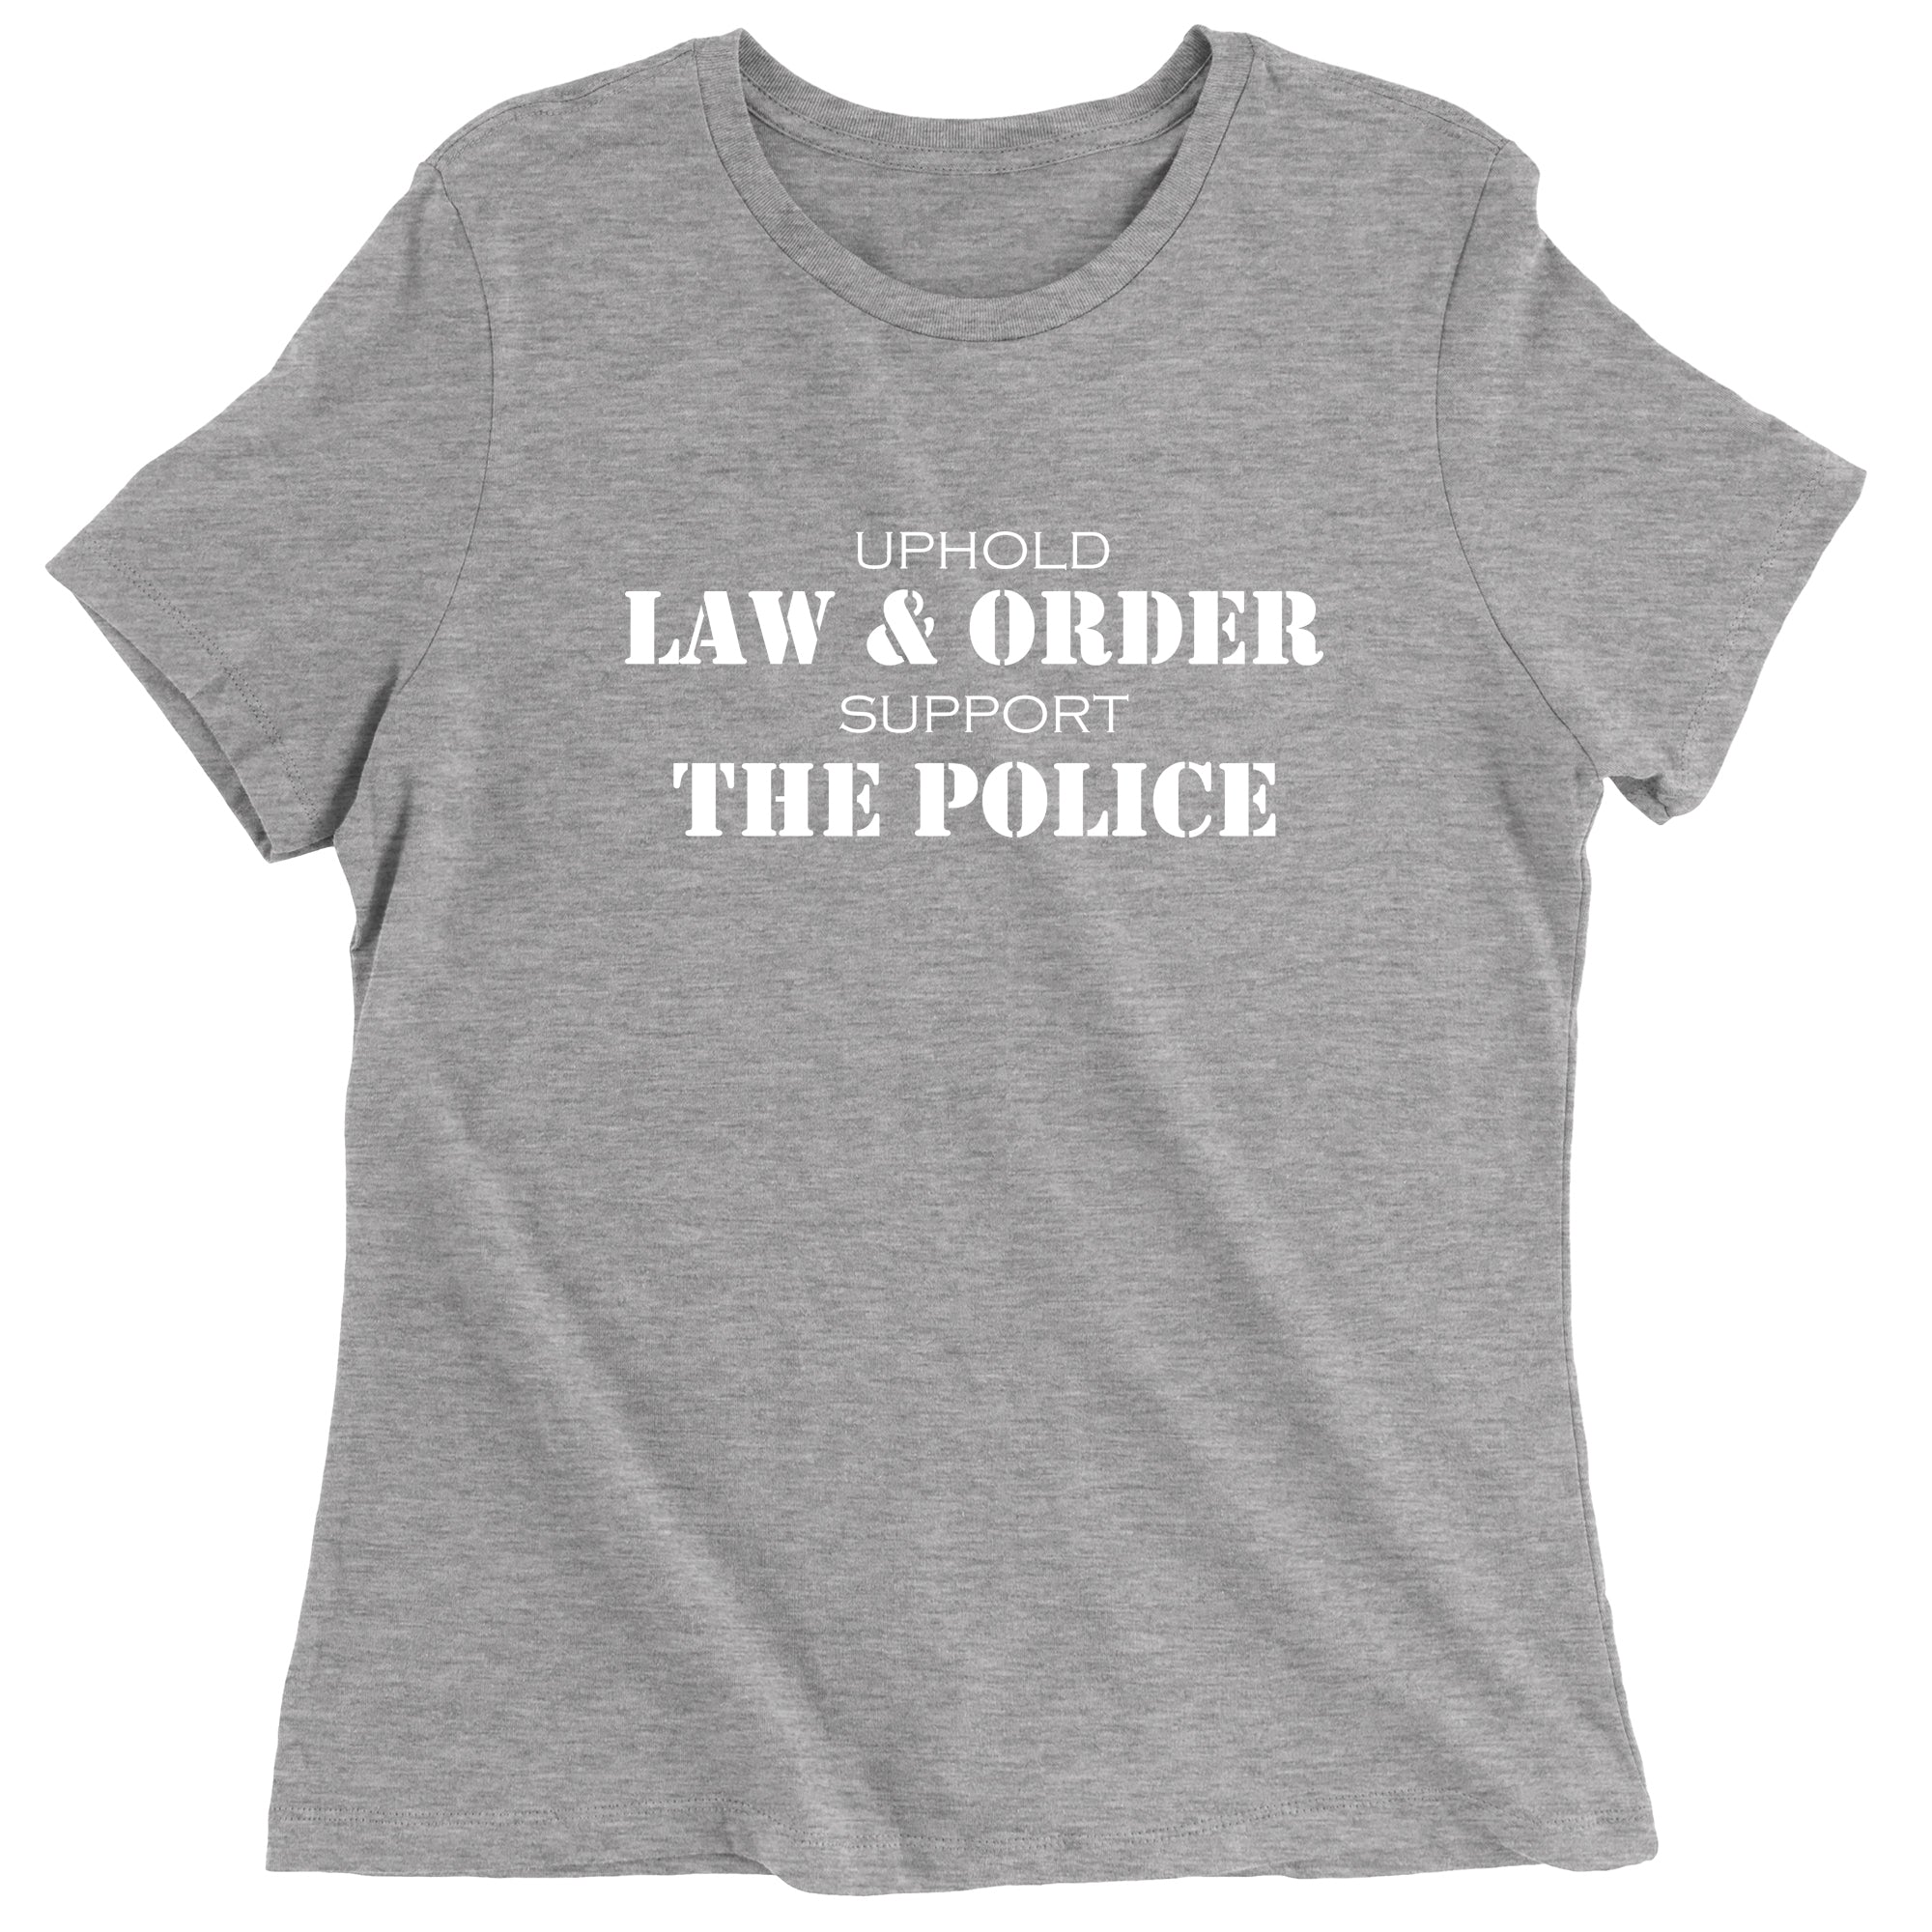 Trump Law & Order And Police Support Women's T-Shirt